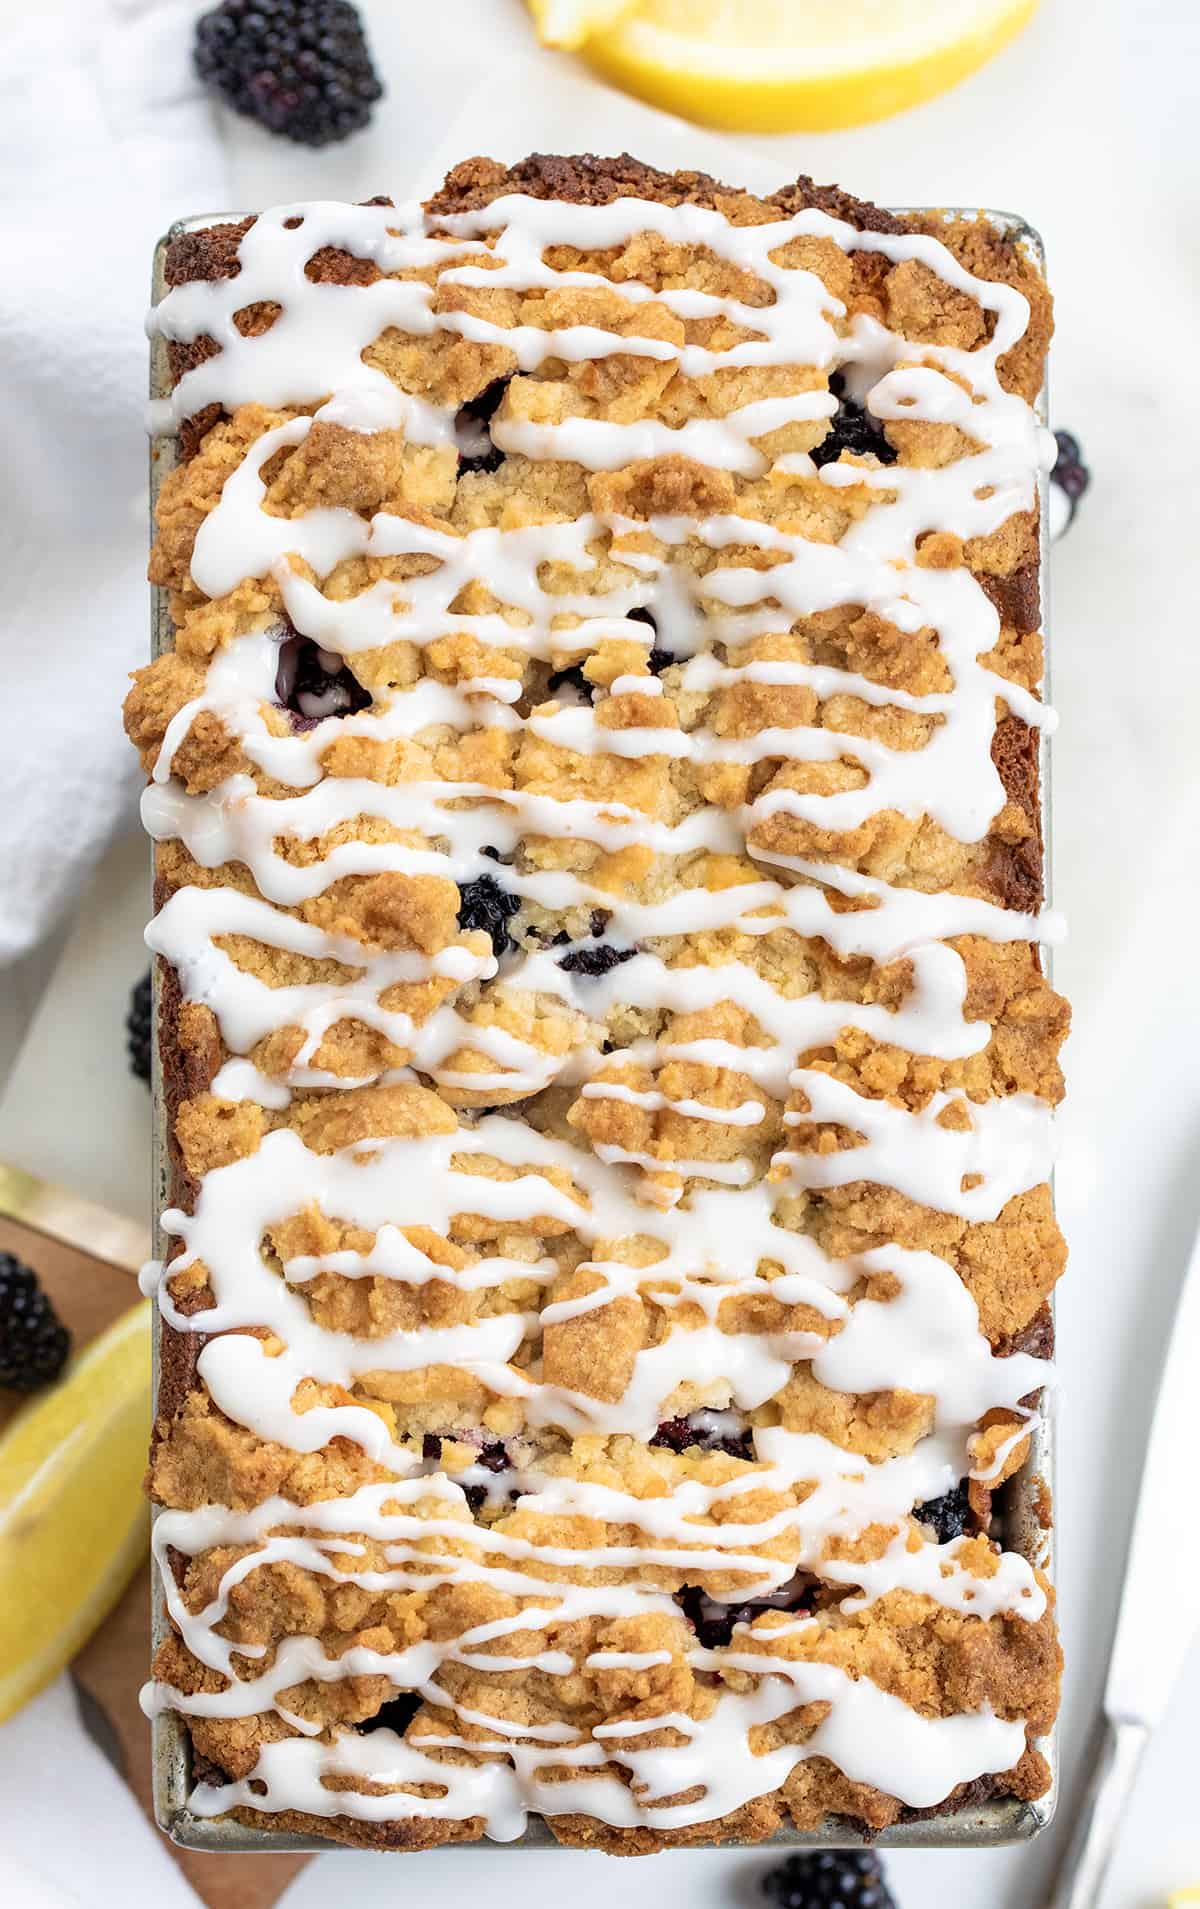 Blackberry Lemon Loaf on a White Counter with Glaze.